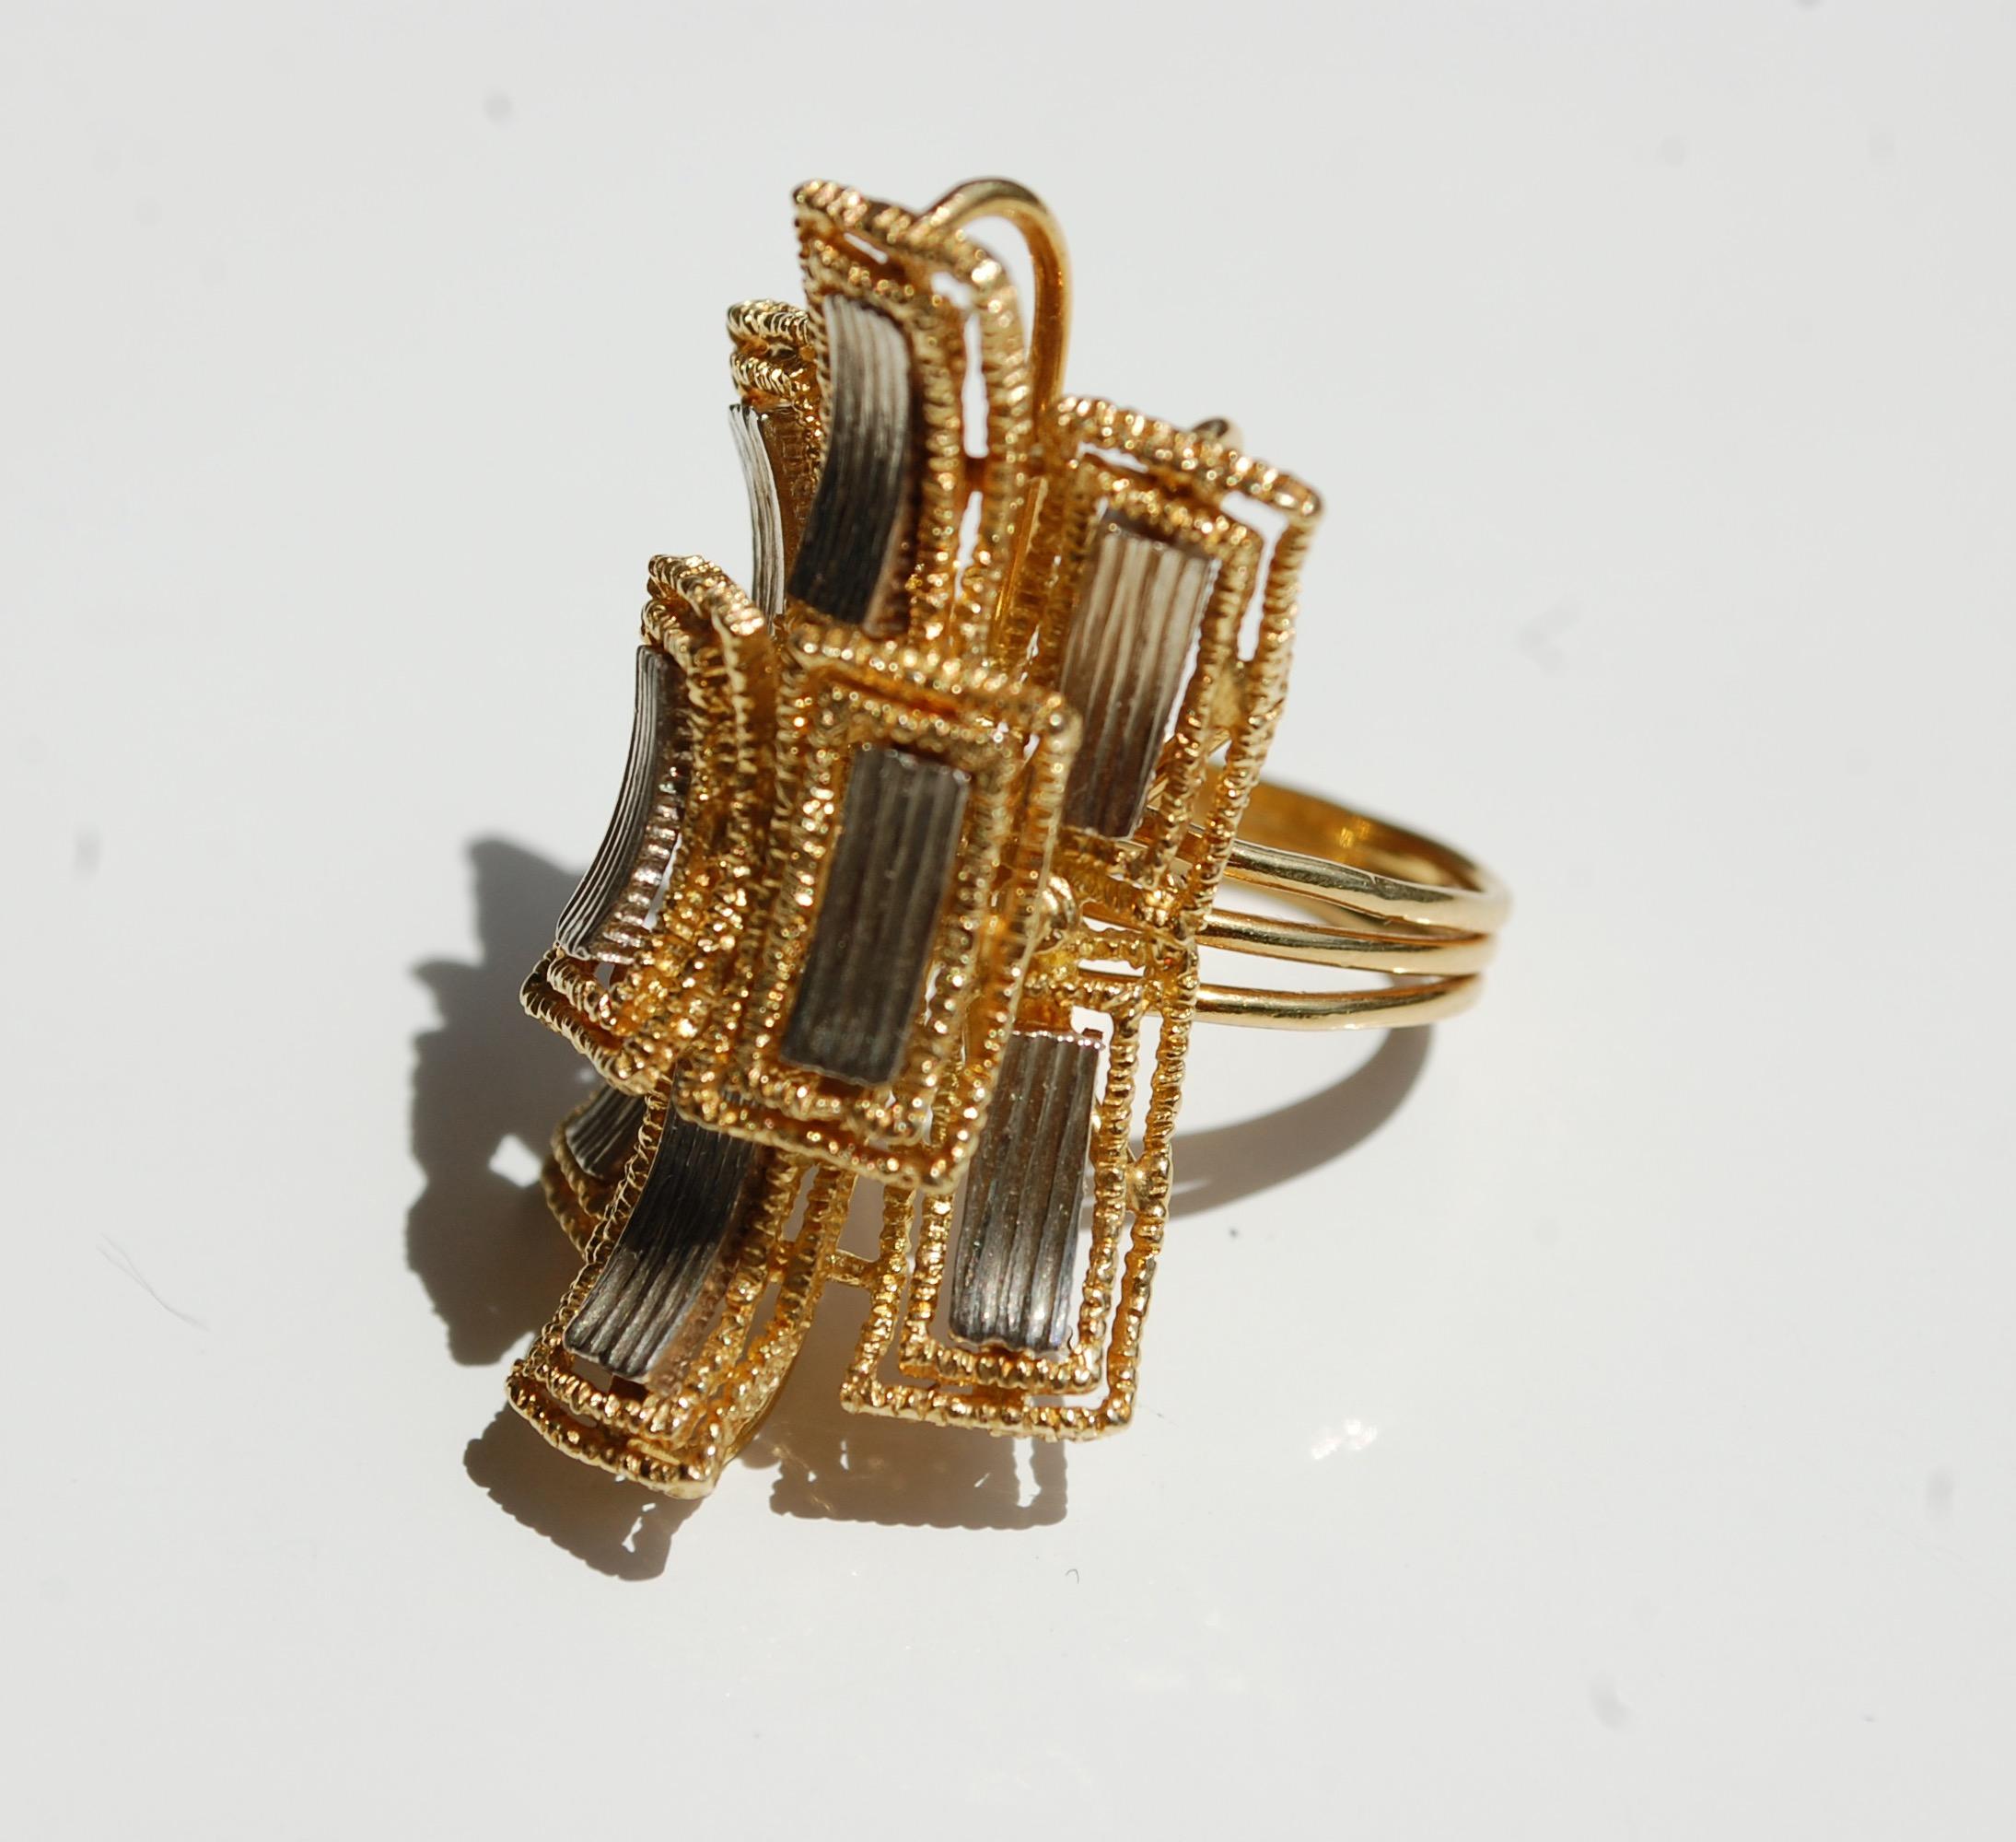 Italian 18KG Pagoda Annaratone & Magyary Design Ring 
Vintage Modern stunning two tone 18k gold Pagoda design ring, stamp AL (Annaratone & Magyary Design) 419, 18K 750 Italy. Beautiful large statement ring measuring 1.34 inch long and about 17.2